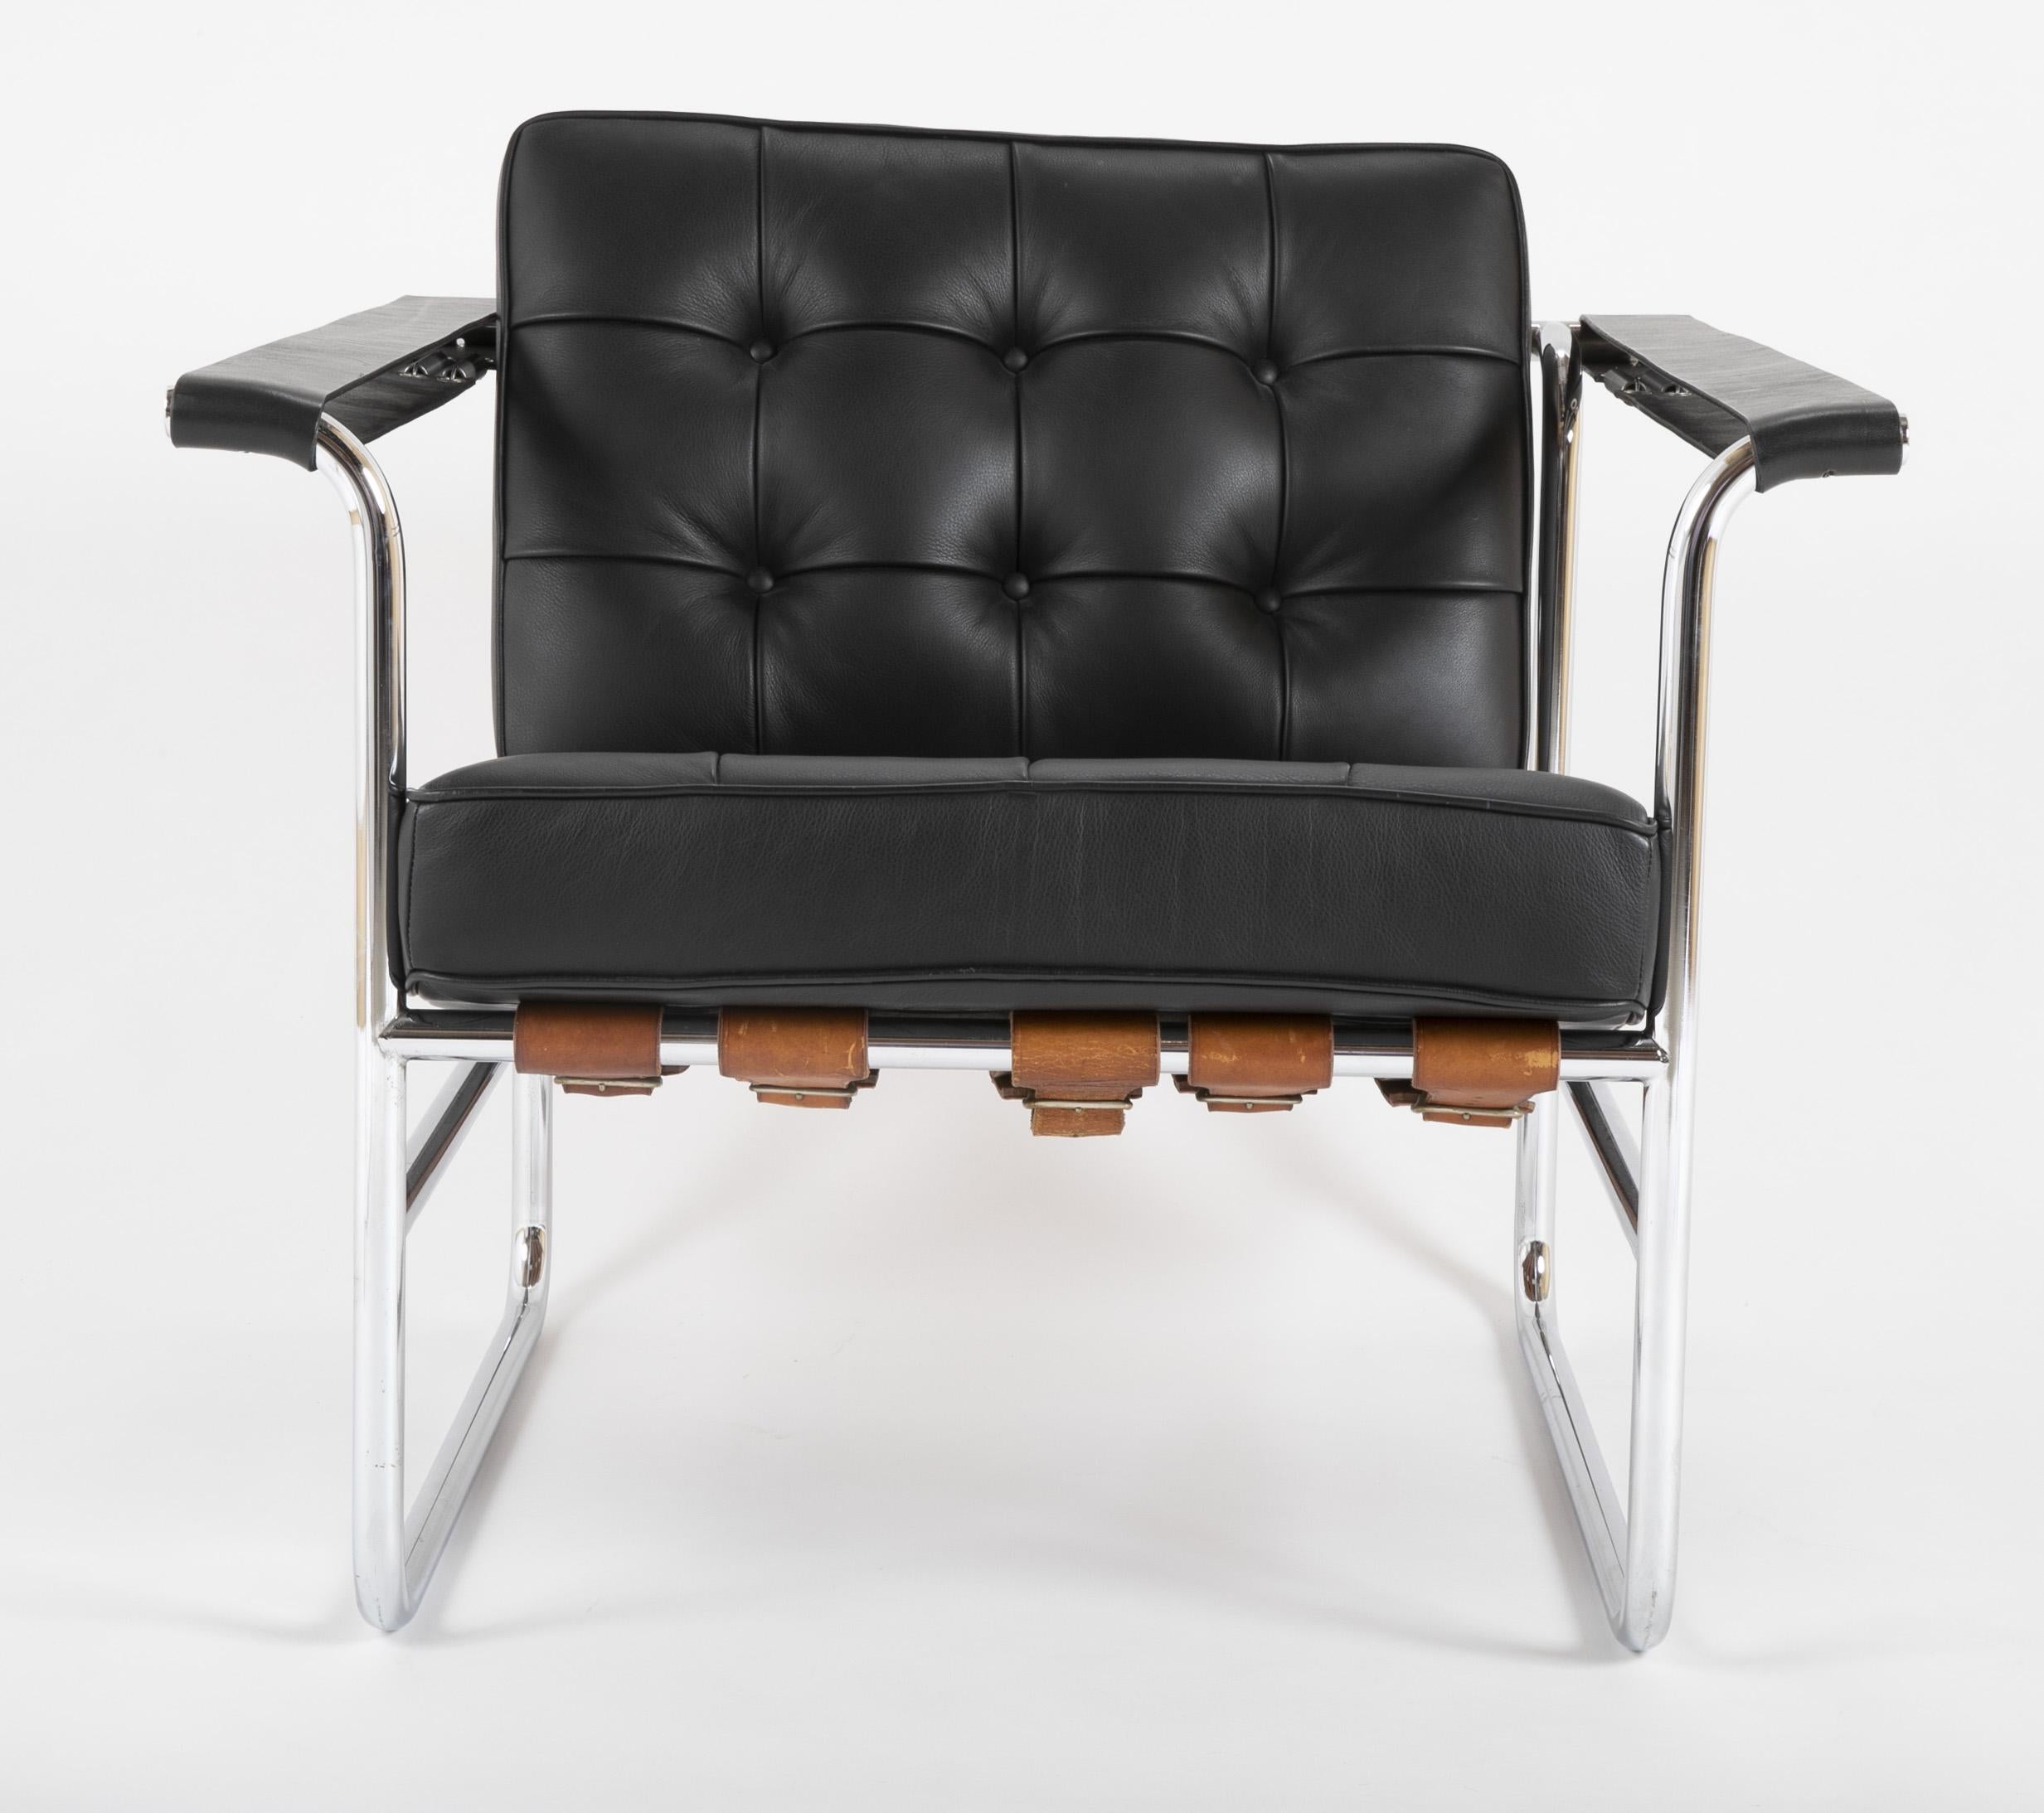 A tubular chromed steel and leather arm chair designed by Hans Eichenberger for De Sede. Known as model HE 113. The straps are Cognac colored leather with black leather cushions.  Circa 1952.

Seat height : 18